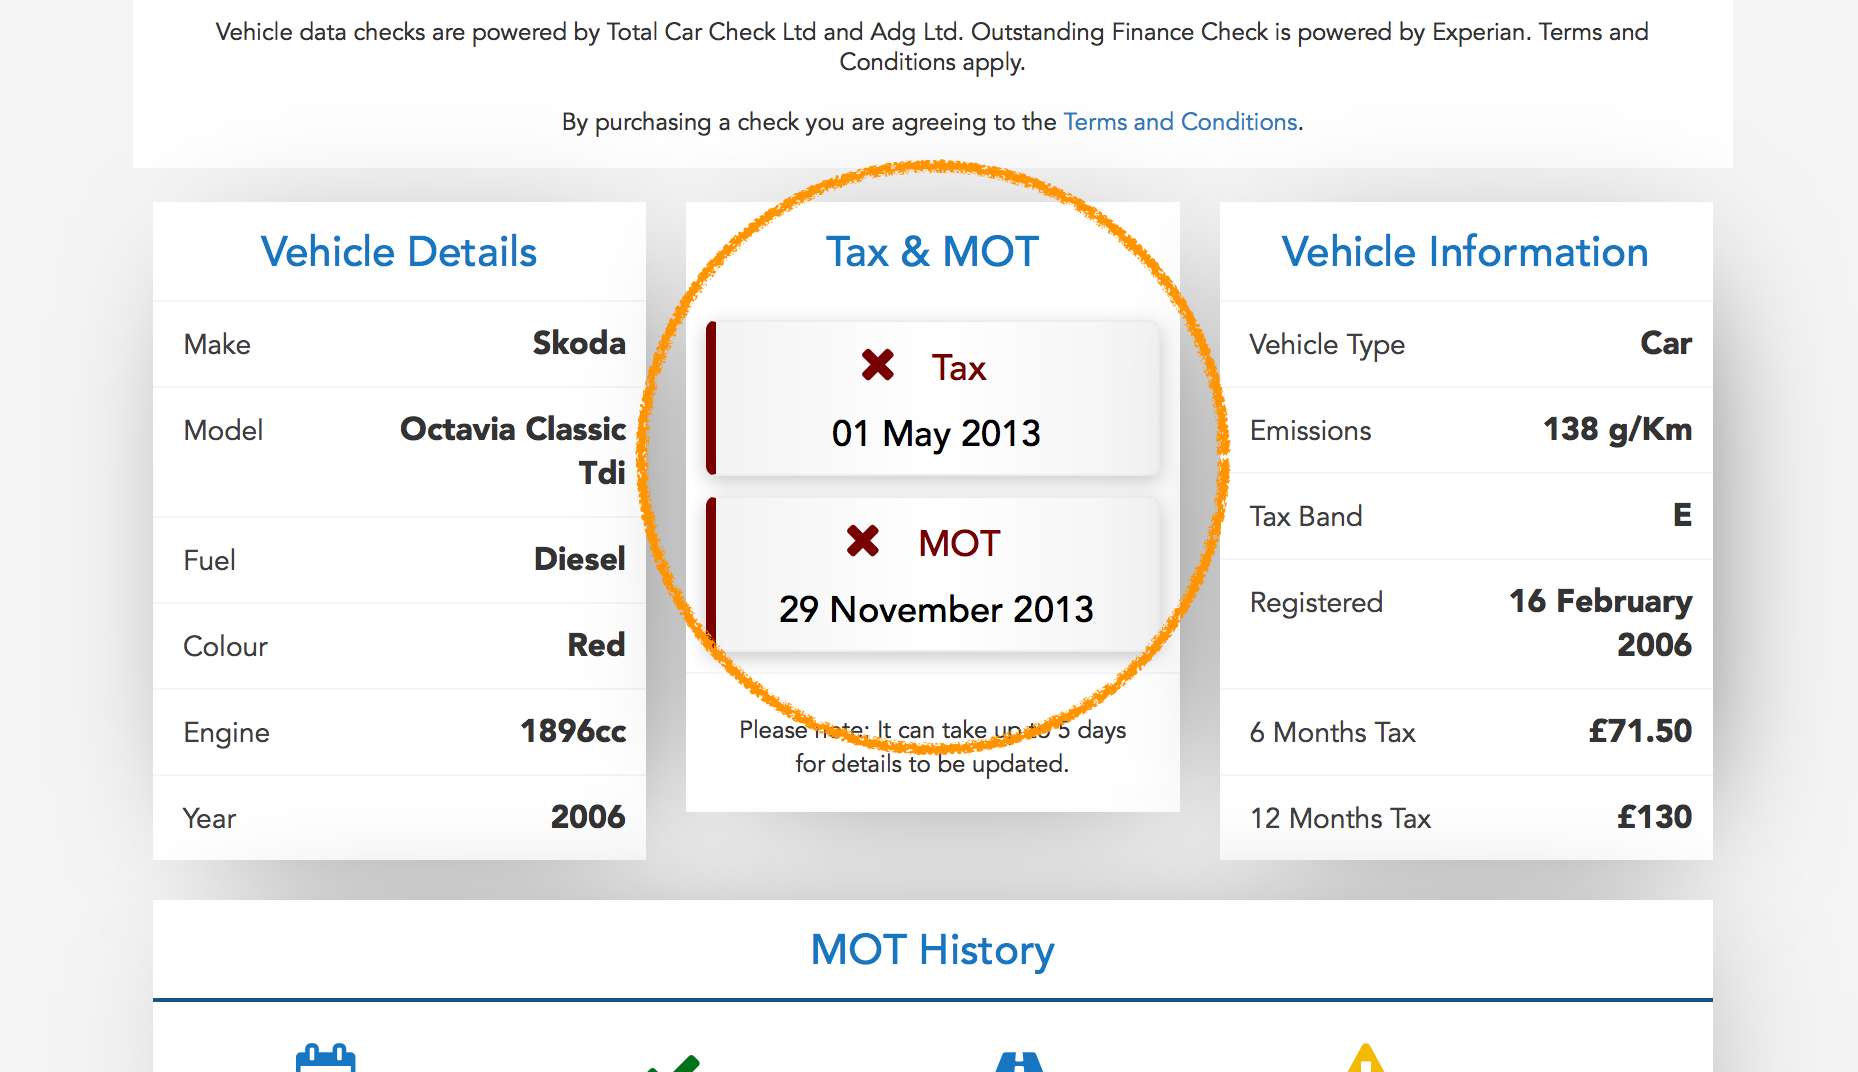 When Is My Vehicle Tax Due? – Car Tax Check